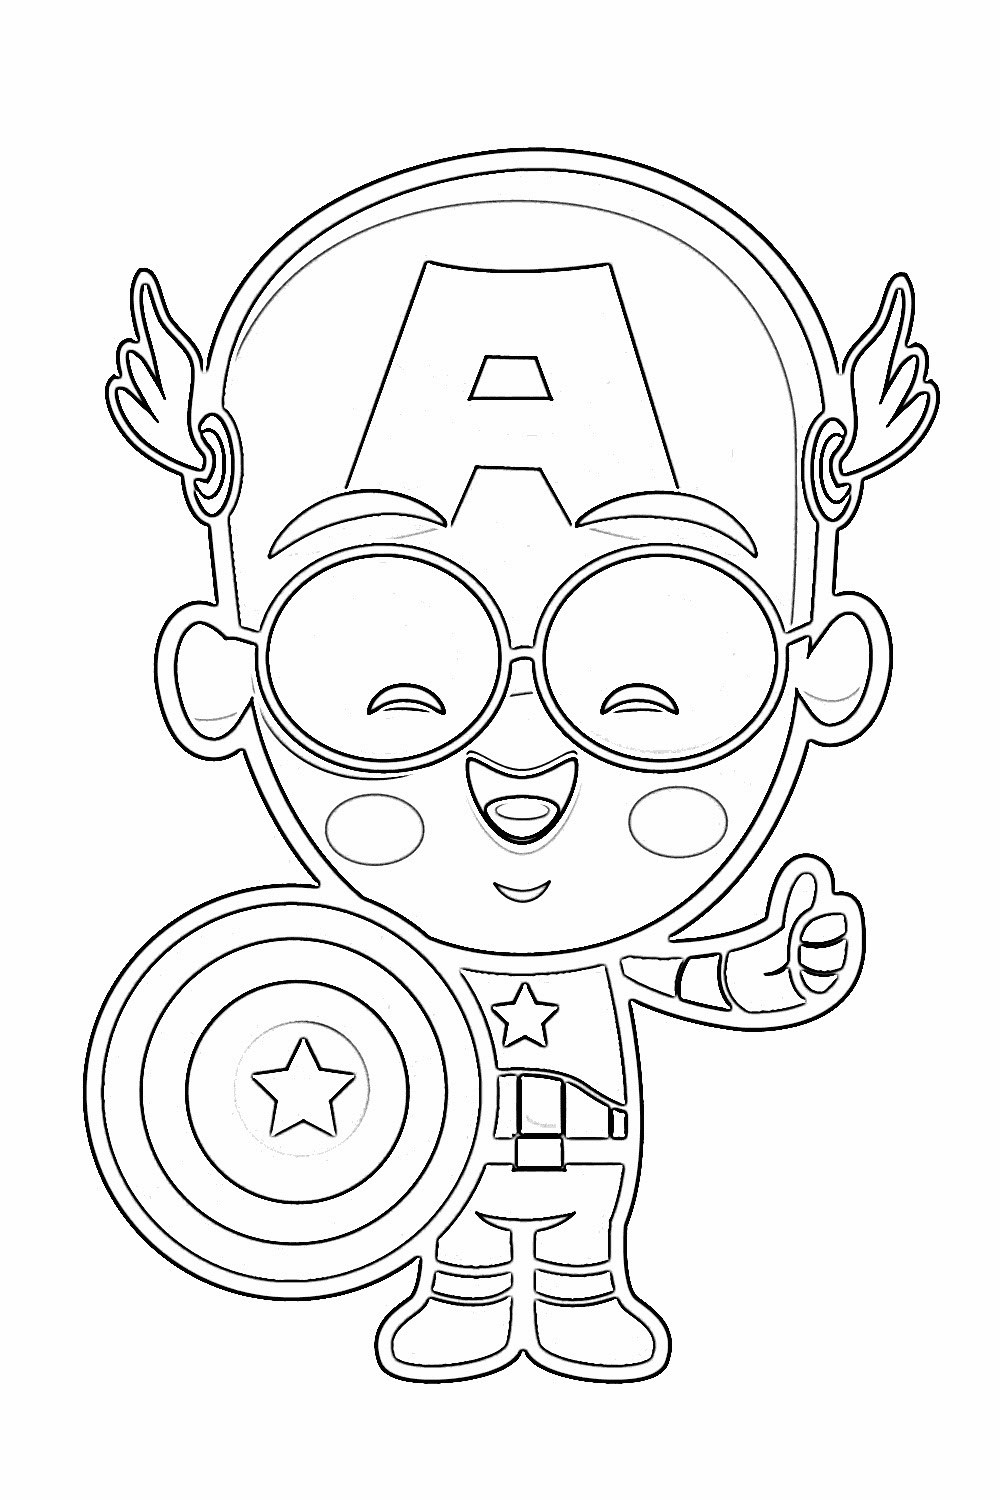 Printable Avengers Coloring Pages
 Craftoholic Ultimate Avengers Coloring Pages